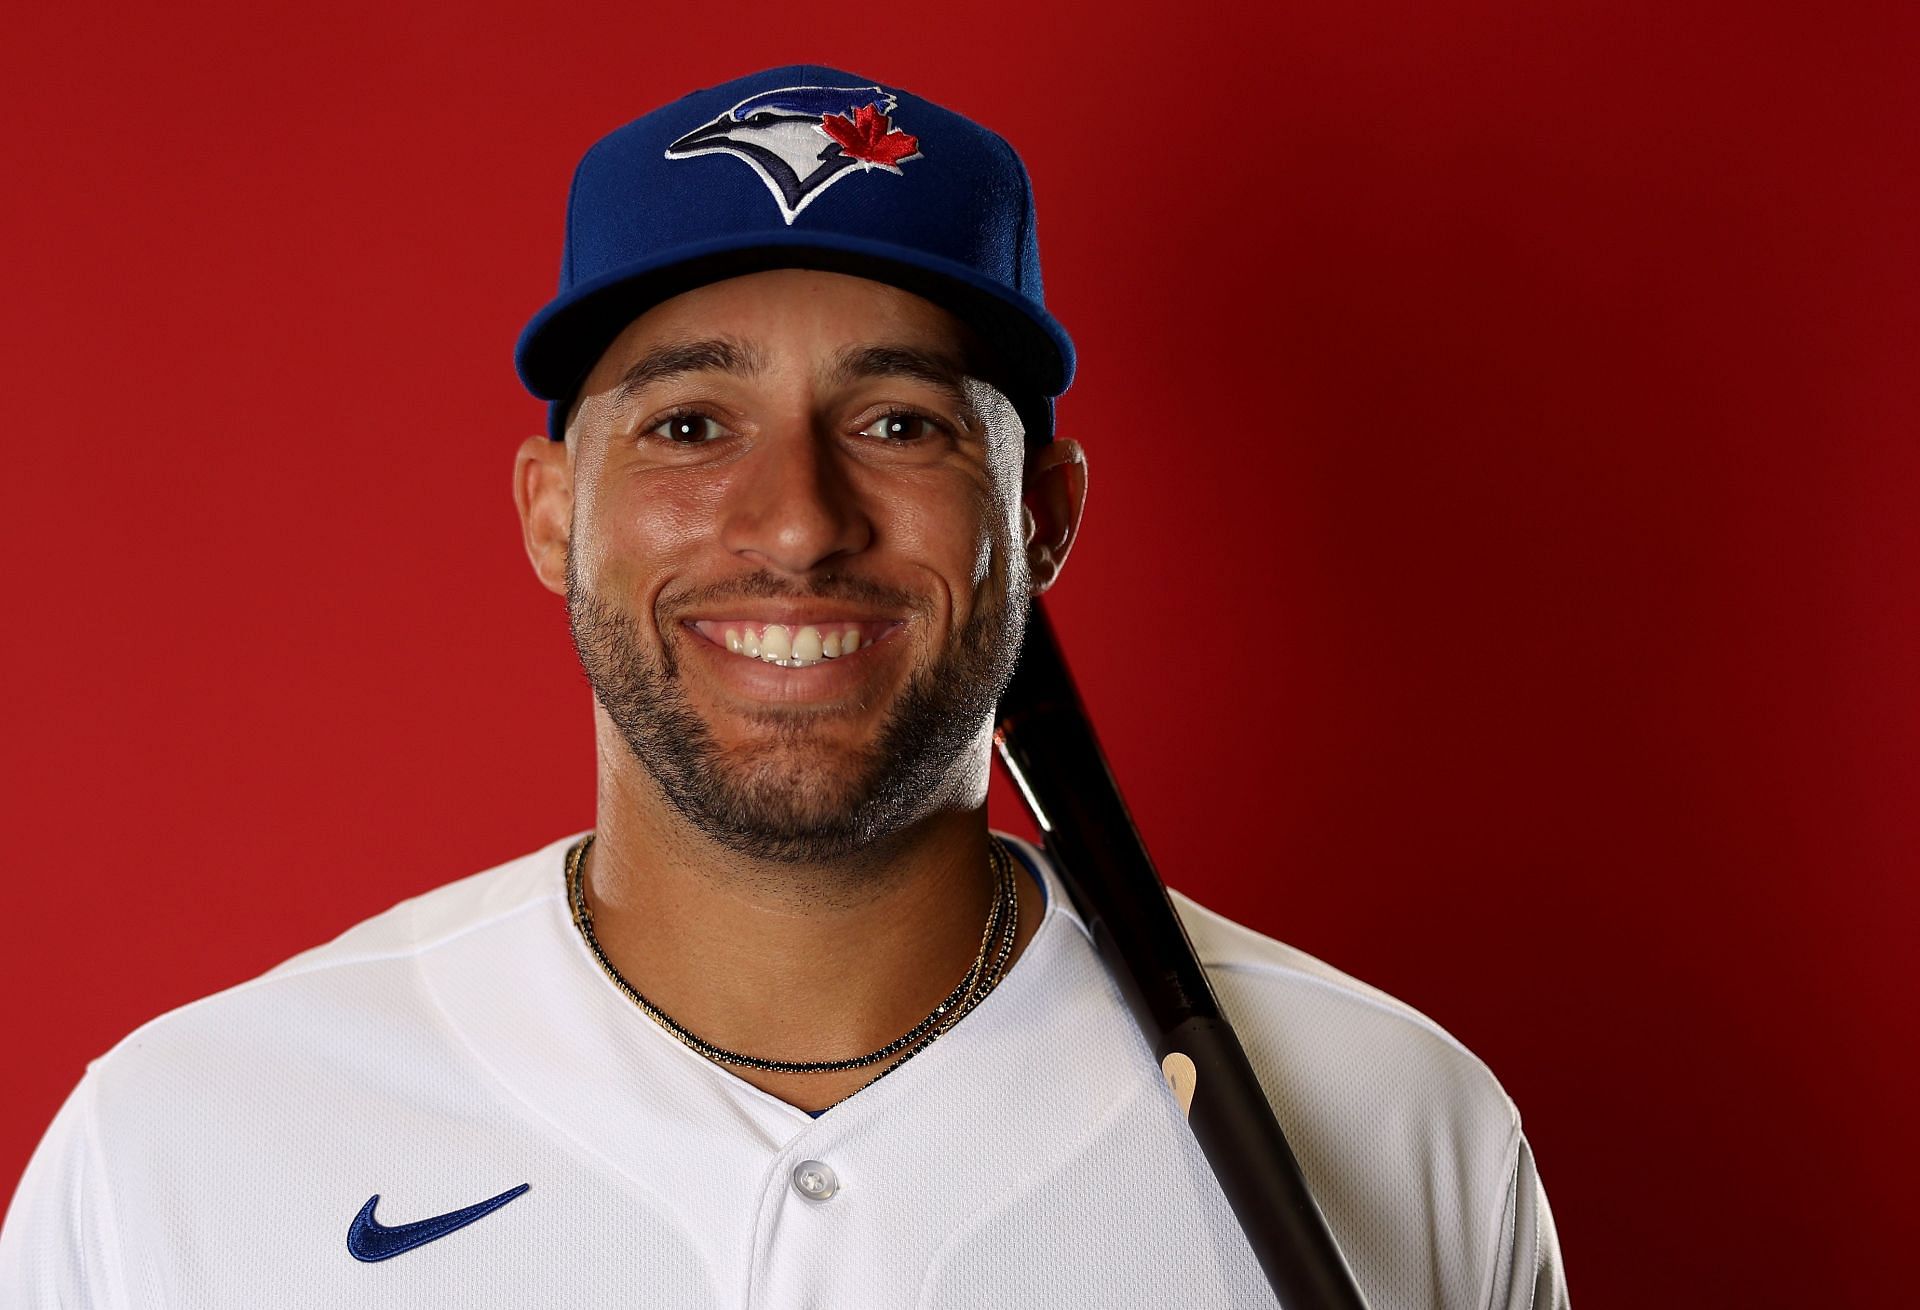 How George Springer helped a writer's son with his stutter